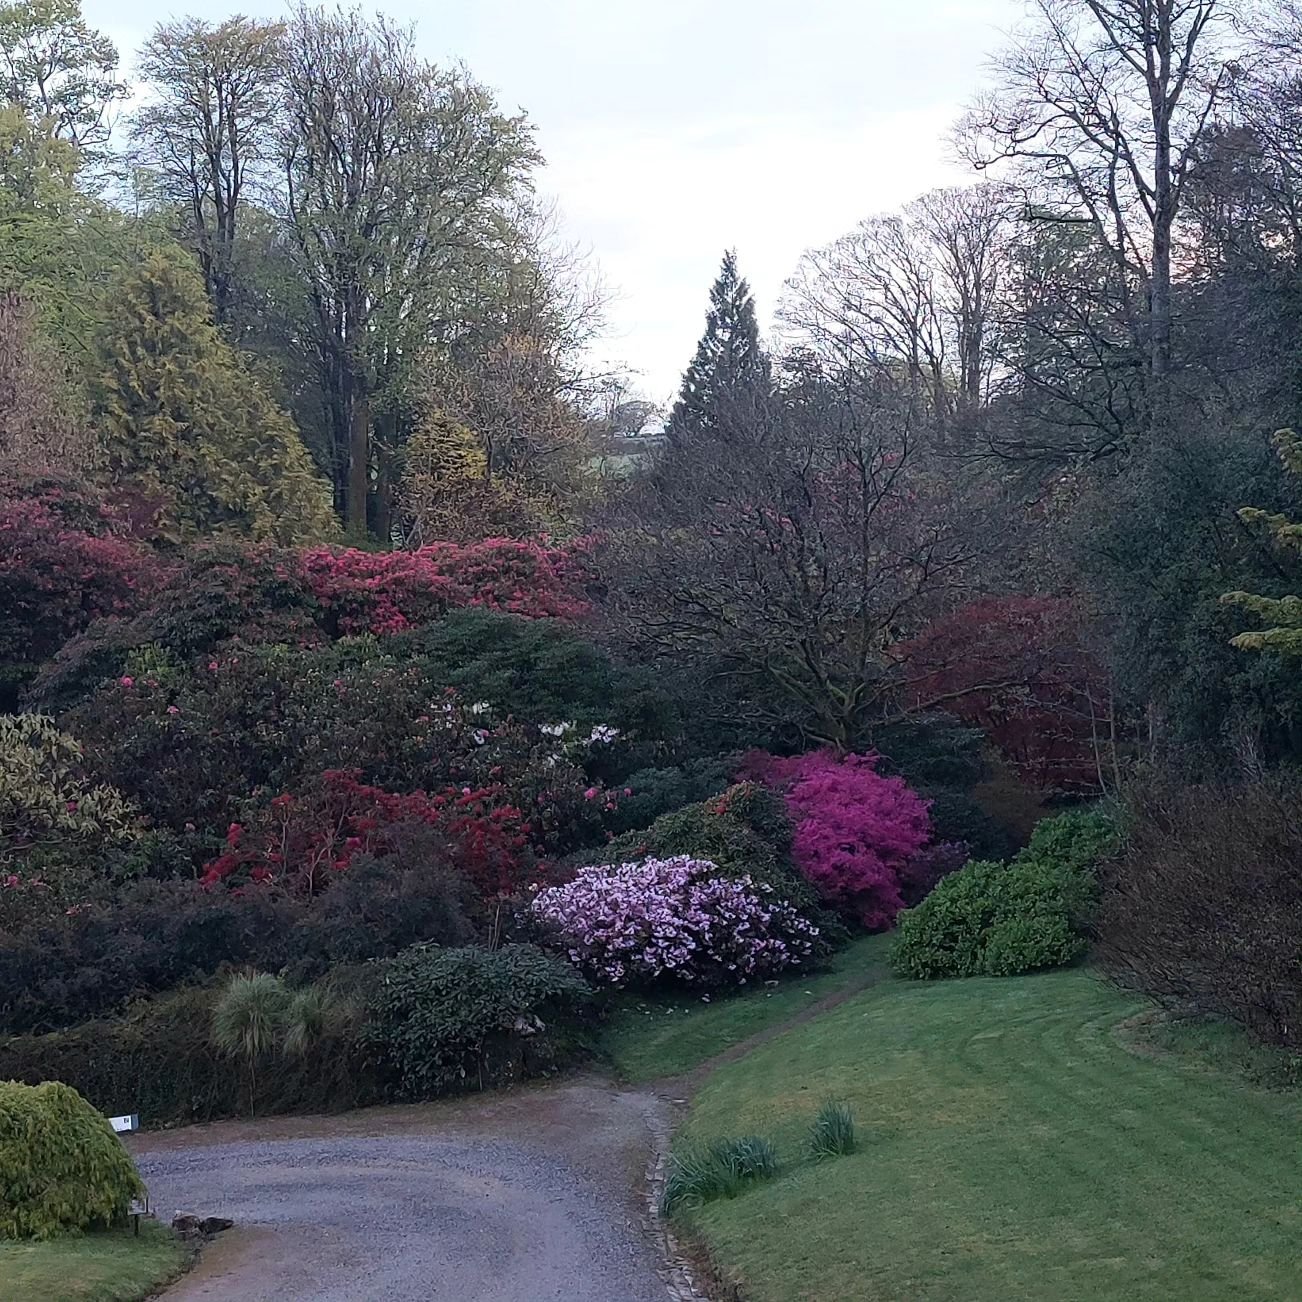 Beautiful colour in all directions from the house when I woke up on this fine May morning. Lukesland is open on Suns,  Weds and Bank Hols 11am to 5pm till 9th June. Full details at www.lukesland.co.uk 

#devongardens #devon #devonlife #gardens #natio